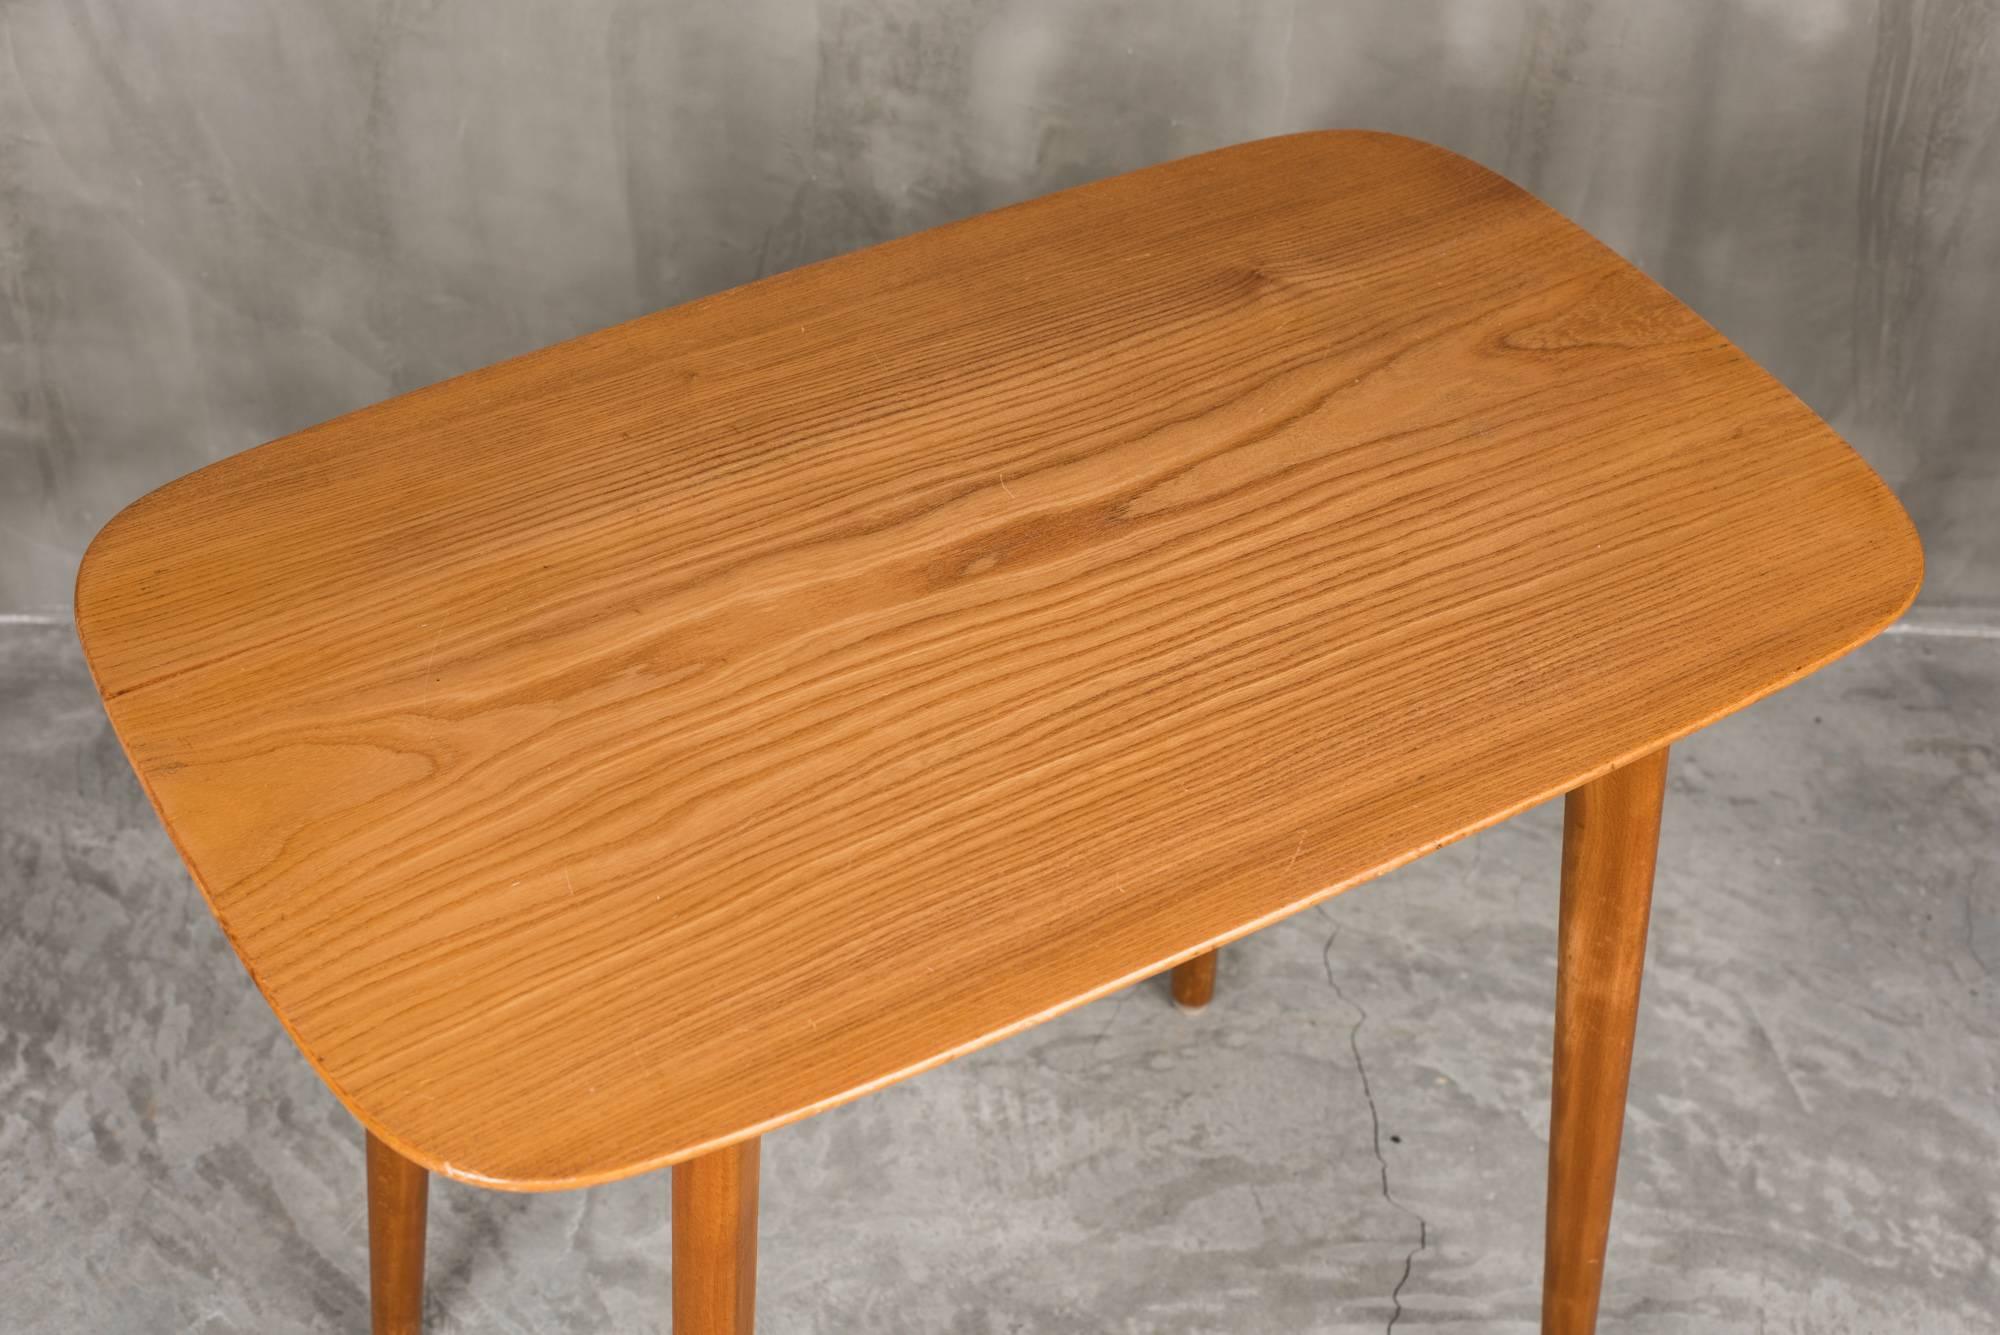 This little retro side table or coffee table is synonymous with the 1960s. Splayed and tapering legs, rounded corners. Perfect as an occasional table, being light it can be moved easily around a room. We found it in Sweden.